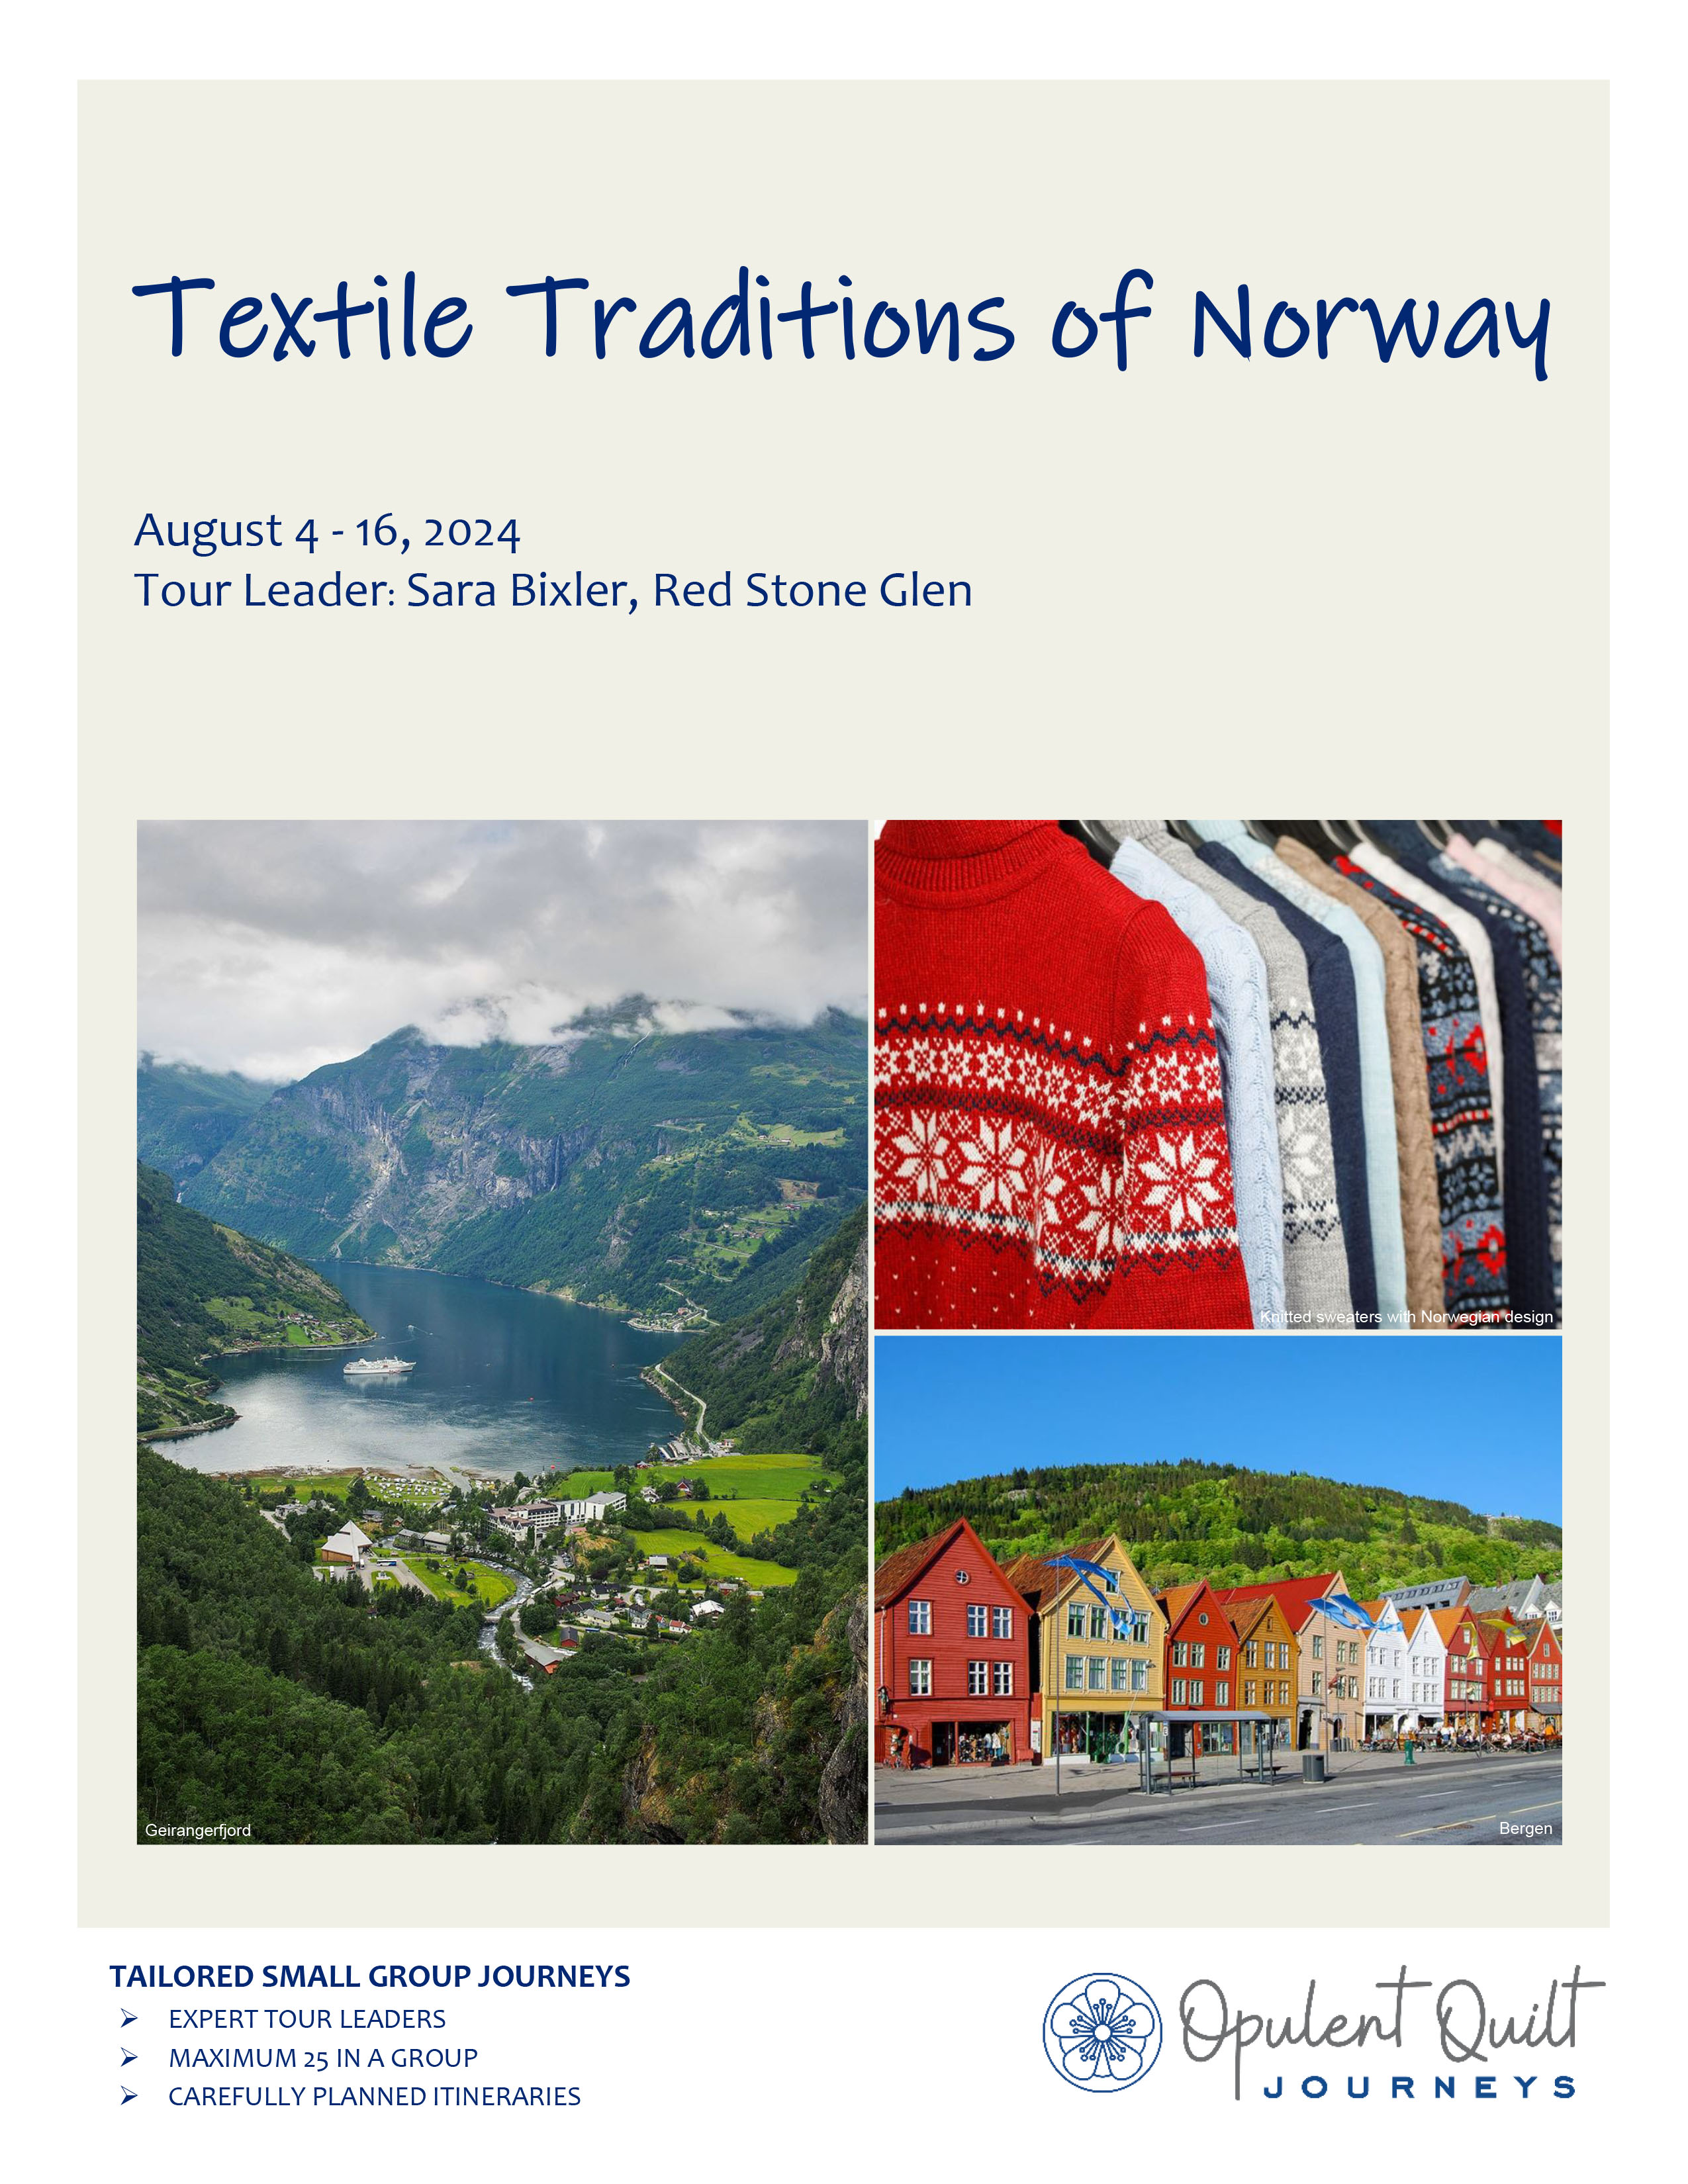 Textile Traditions of Norway brochure